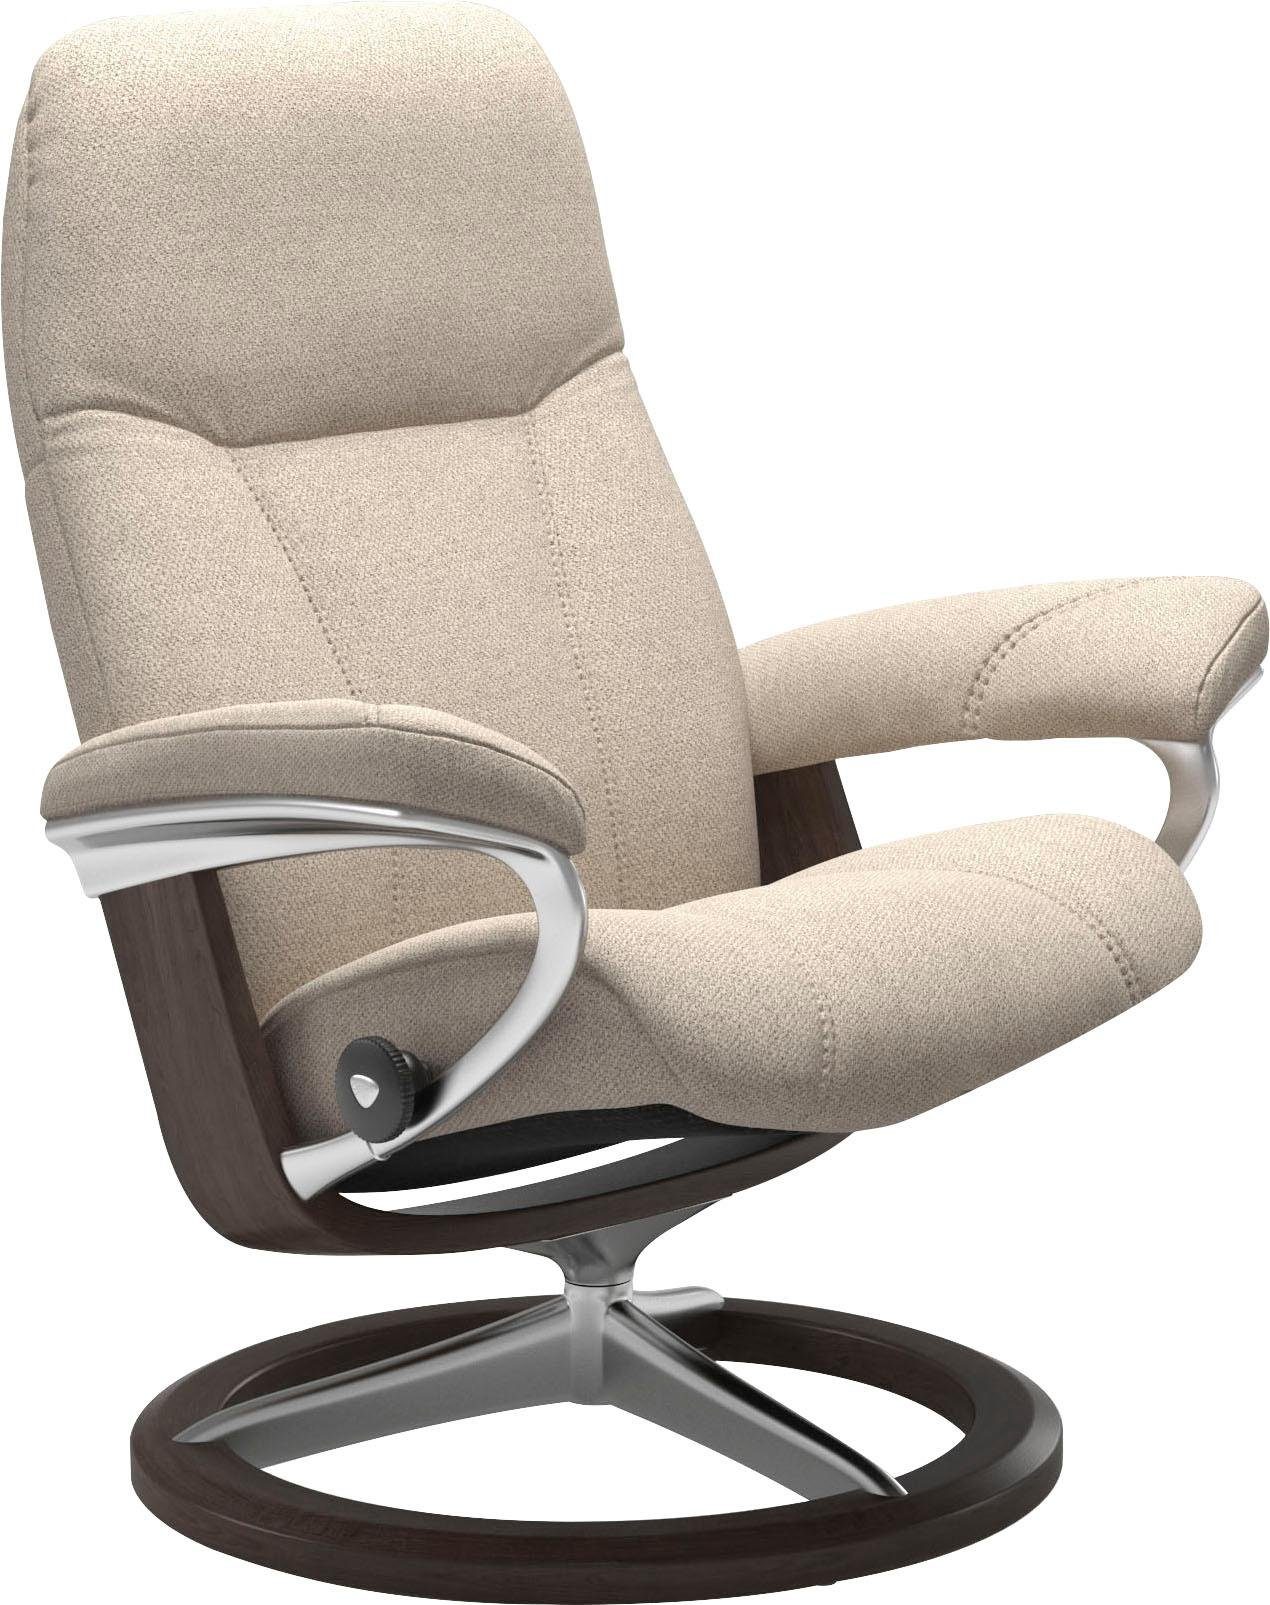 Stressless® Relaxsessel Consul, mit Signature Base, Größe L, Gestell Wenge | Funktionssessel